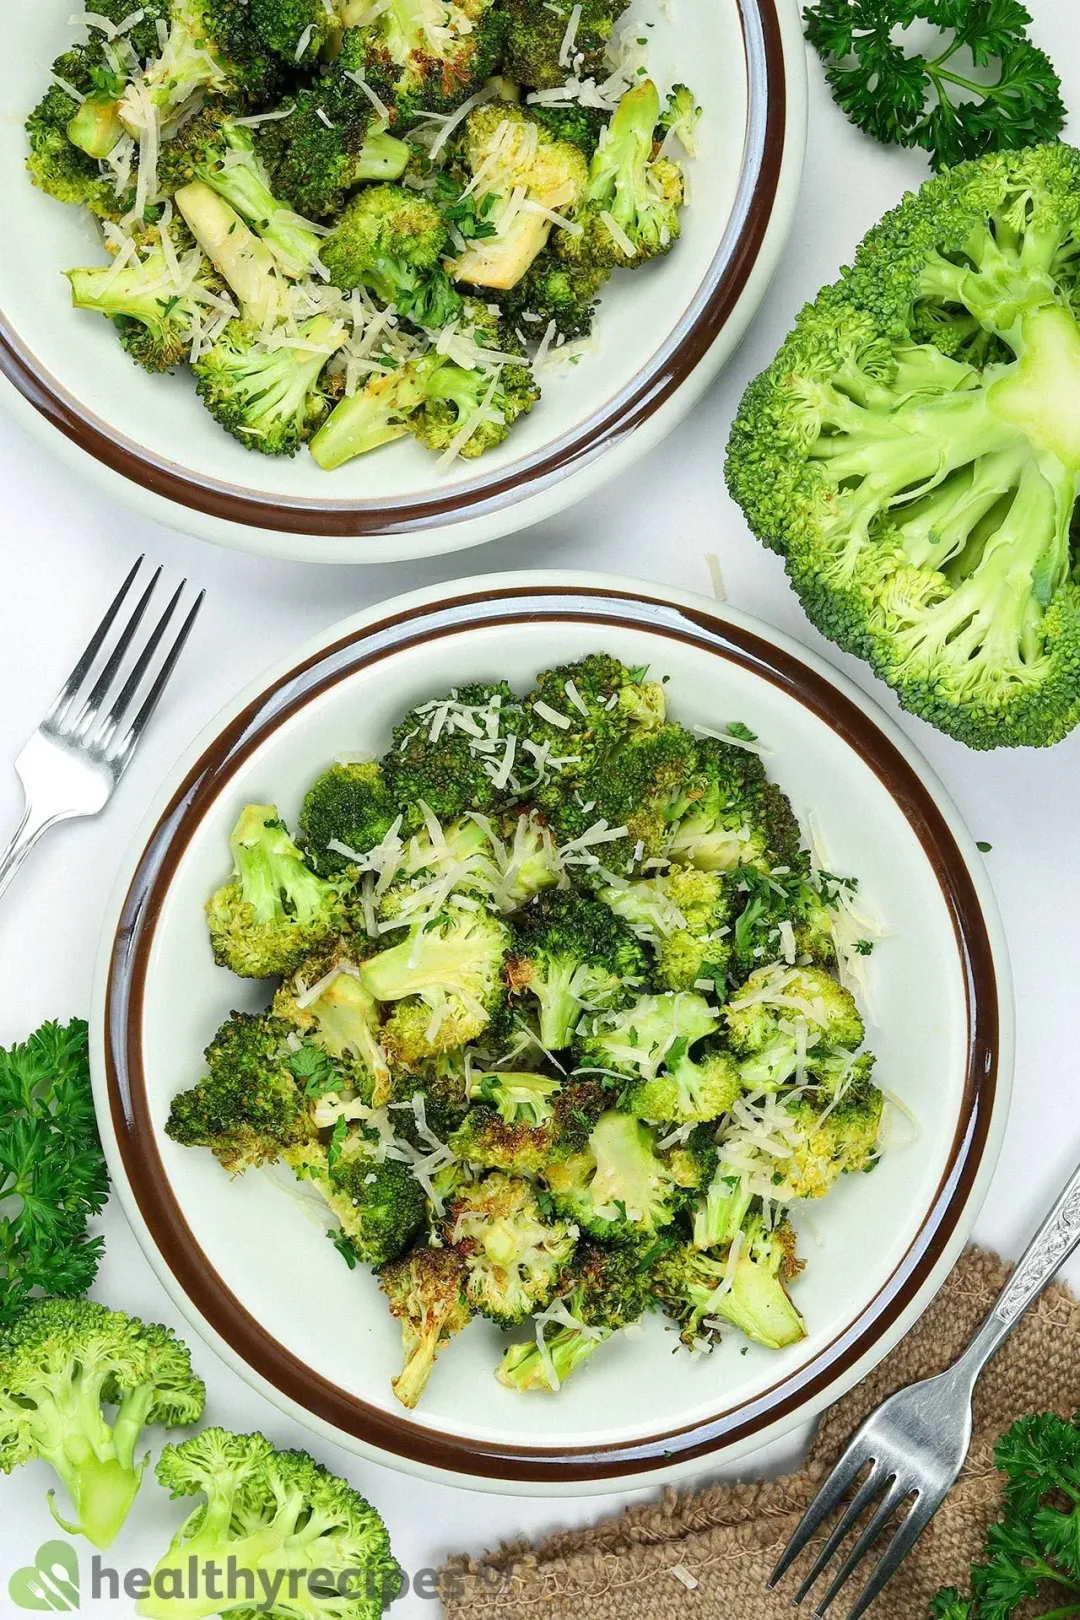 How to Store Cooked and Uncooked Broccoli